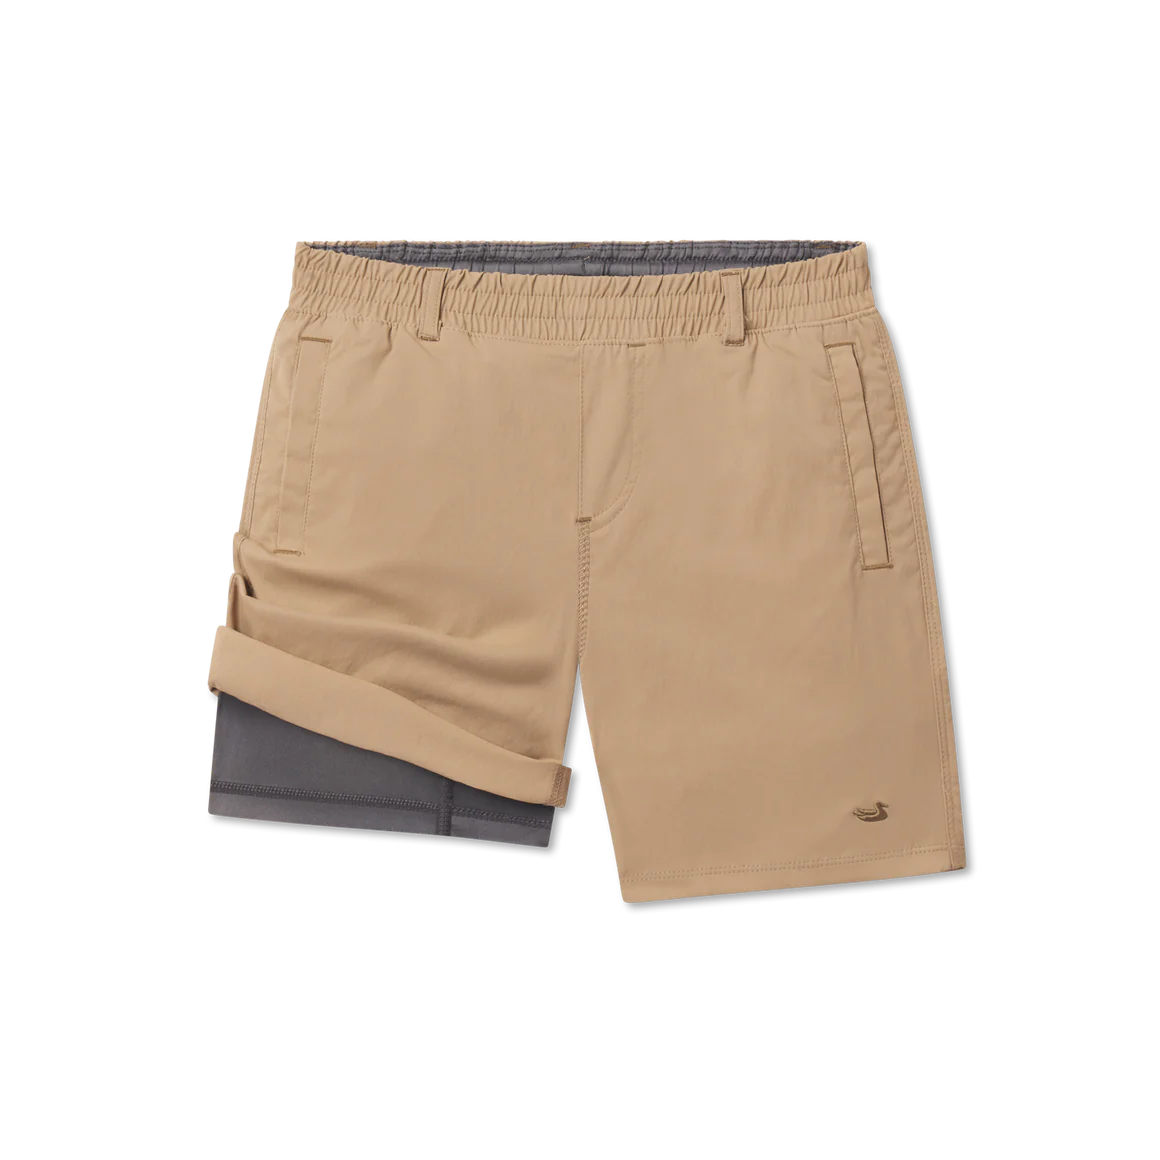 Youth Billfish Lined Performance Short, (3 colors)